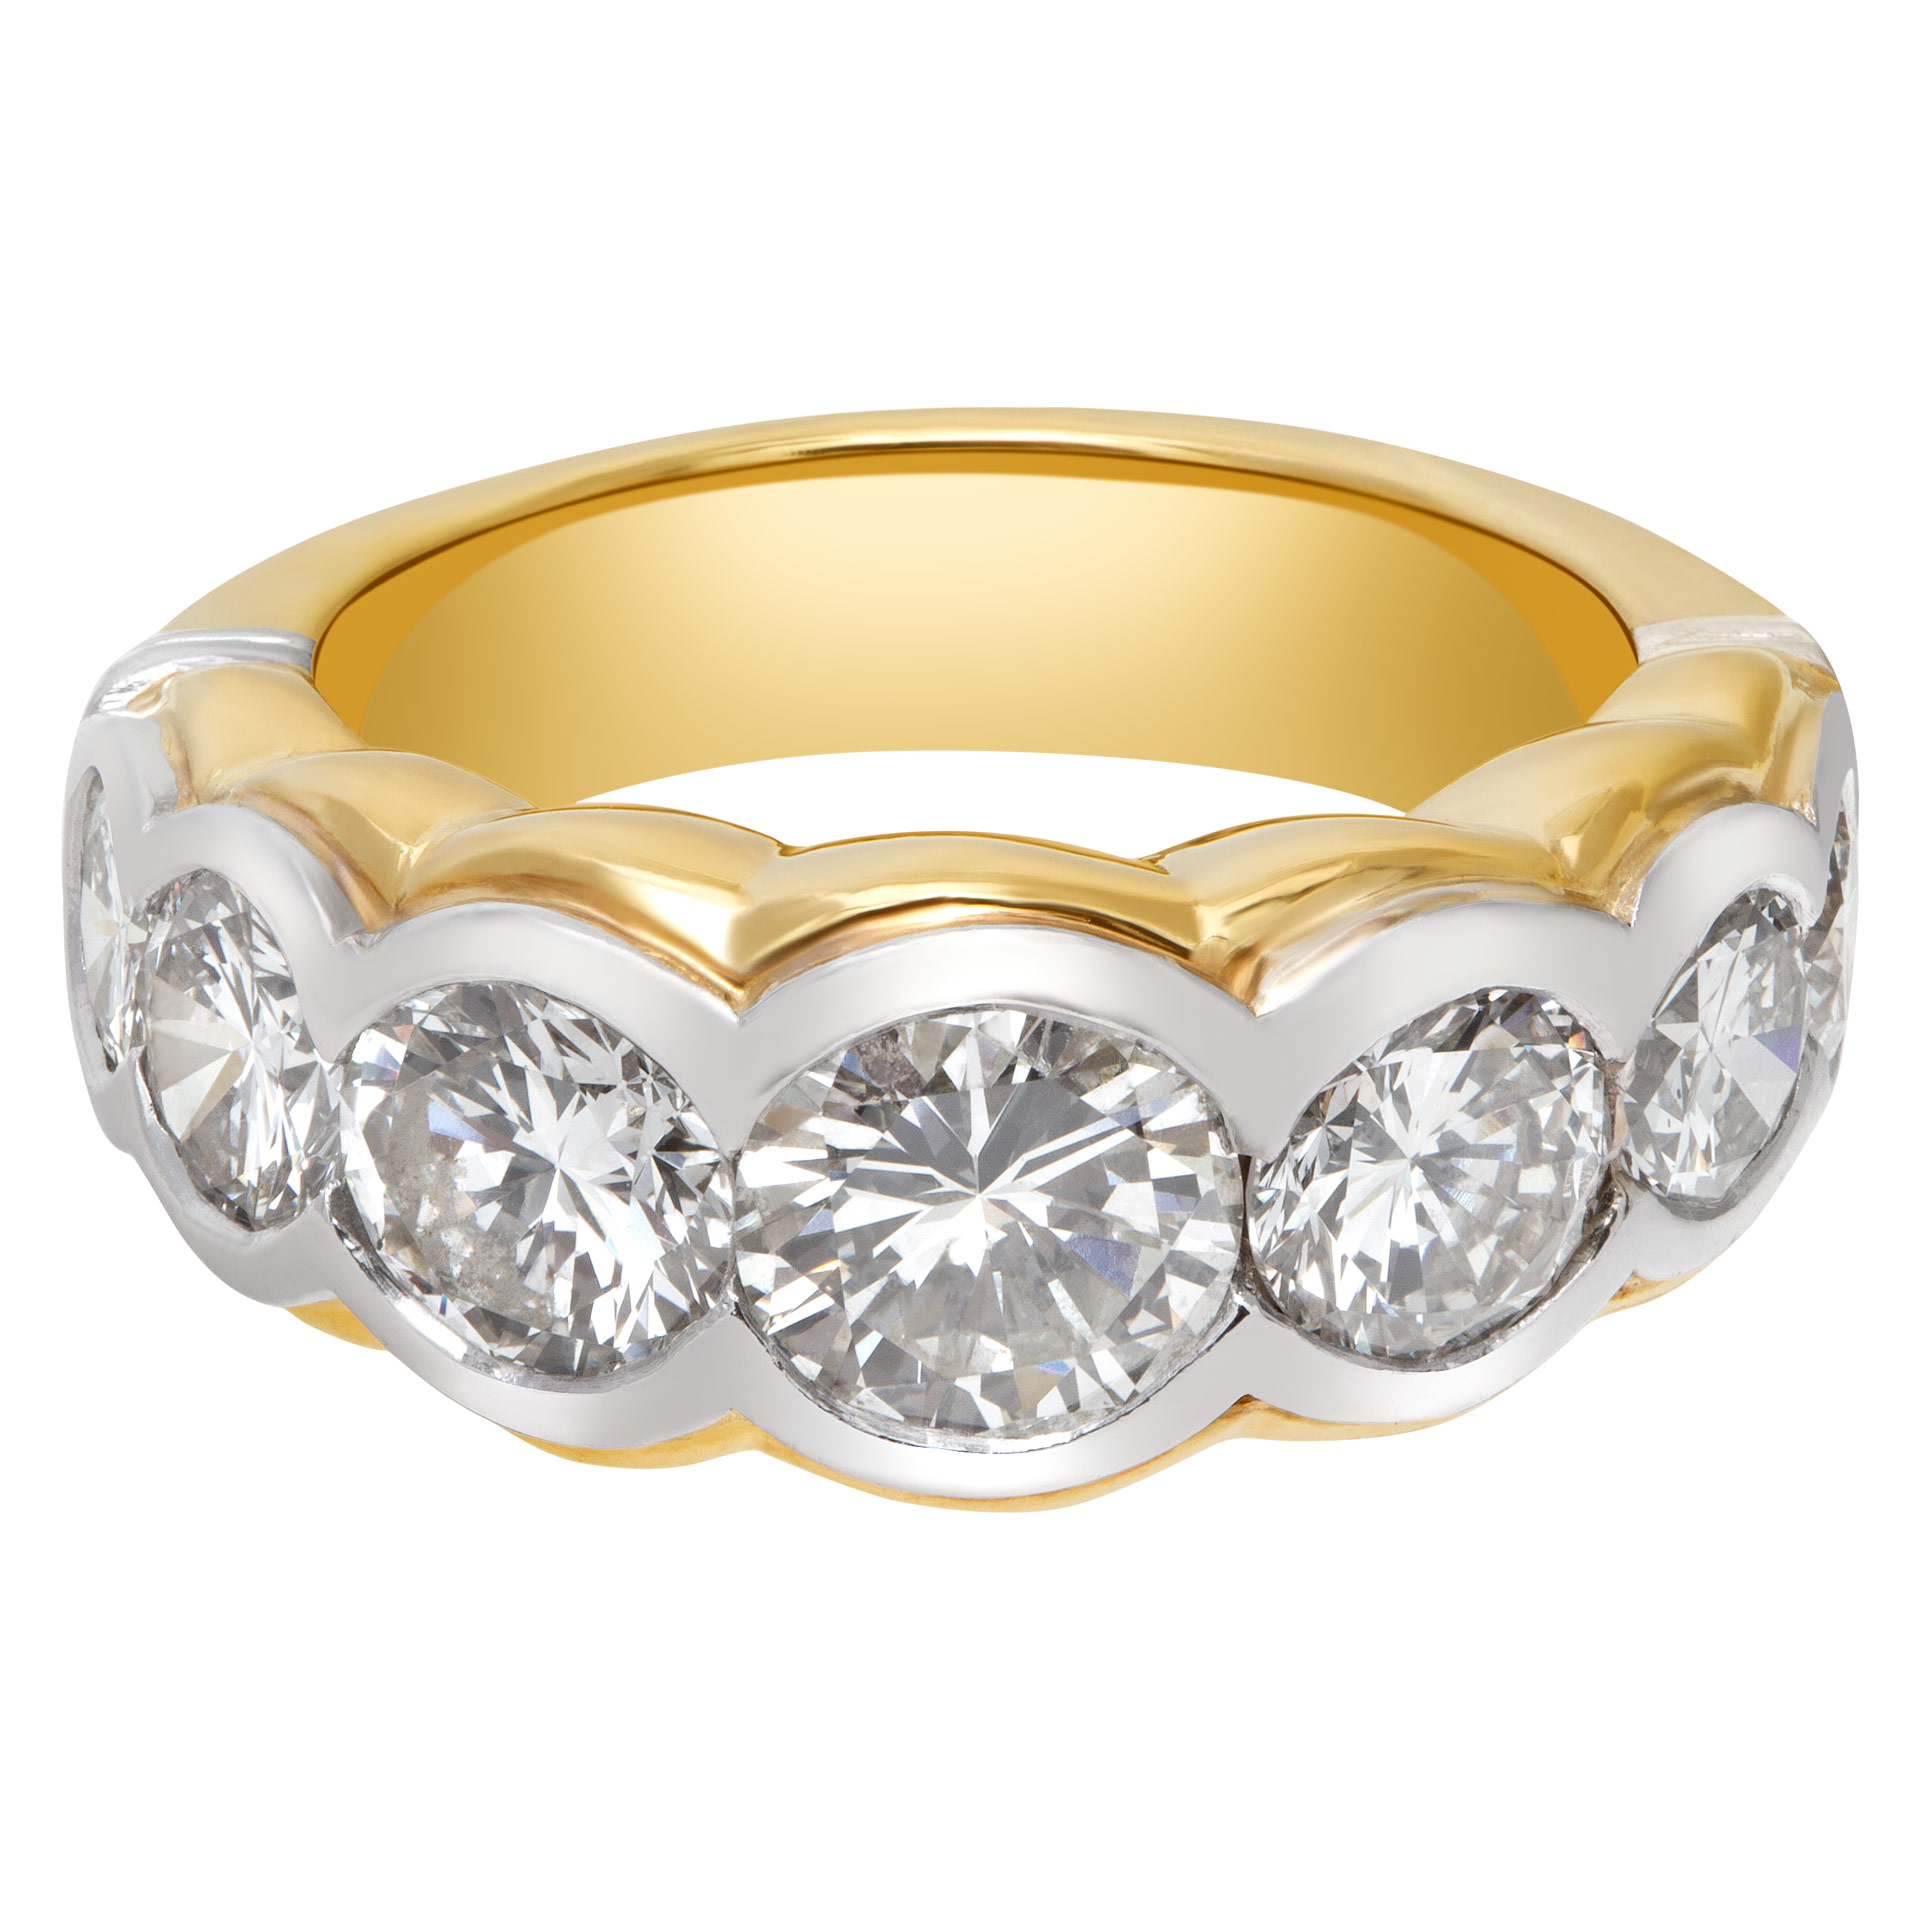 Dazzling diamond ring in platinum & 18k with approx. 3.65ct